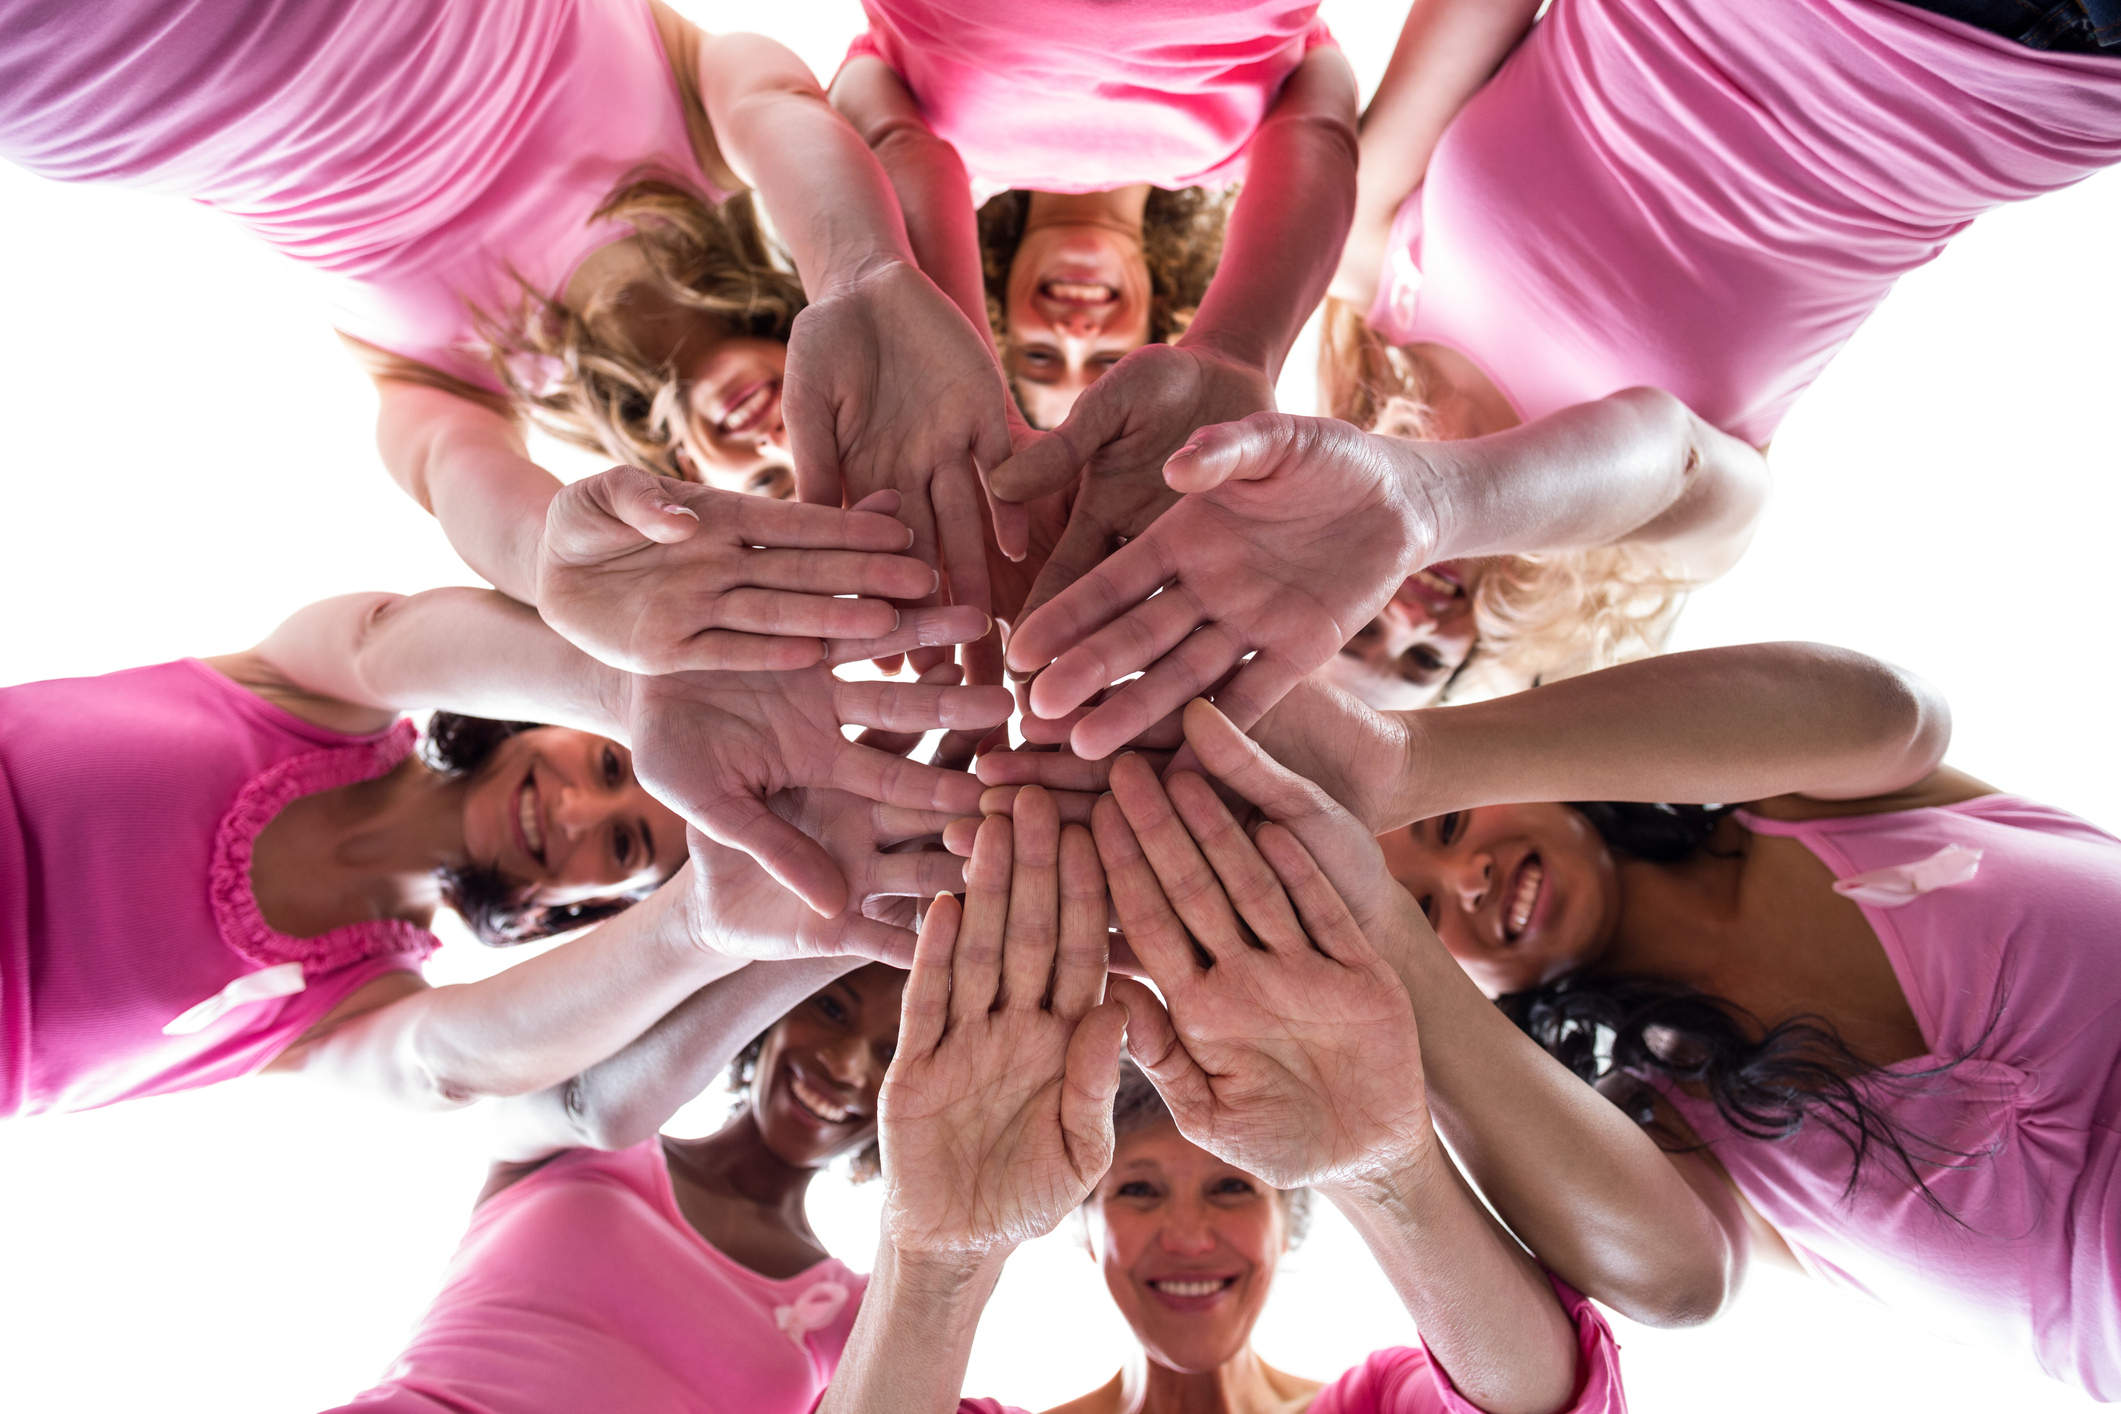 Women in pink outfits joining in a circle for breast cancer awareness